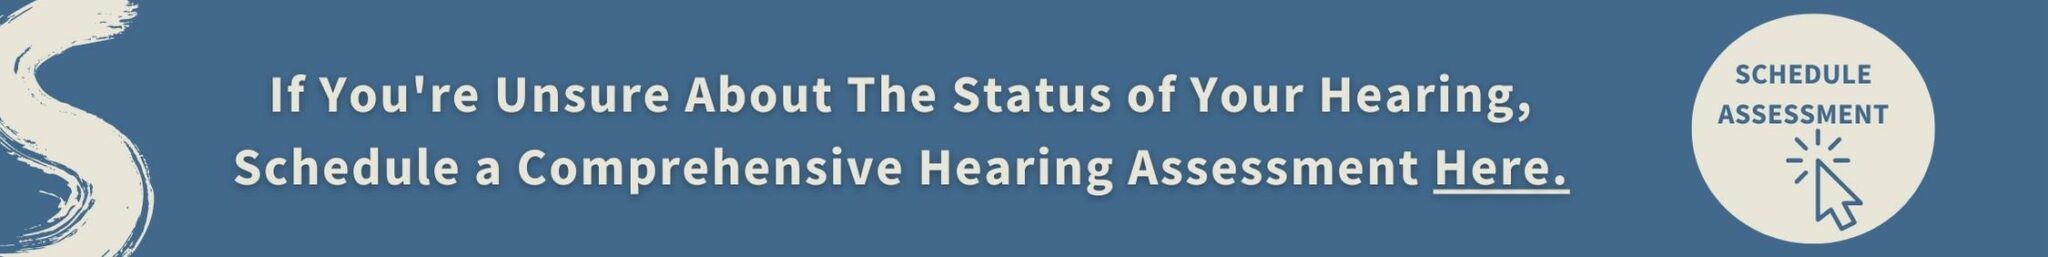 If You're Unsure About The Status of Your Hearing, Schedule a Comprehensive Hearing Assessment Here.